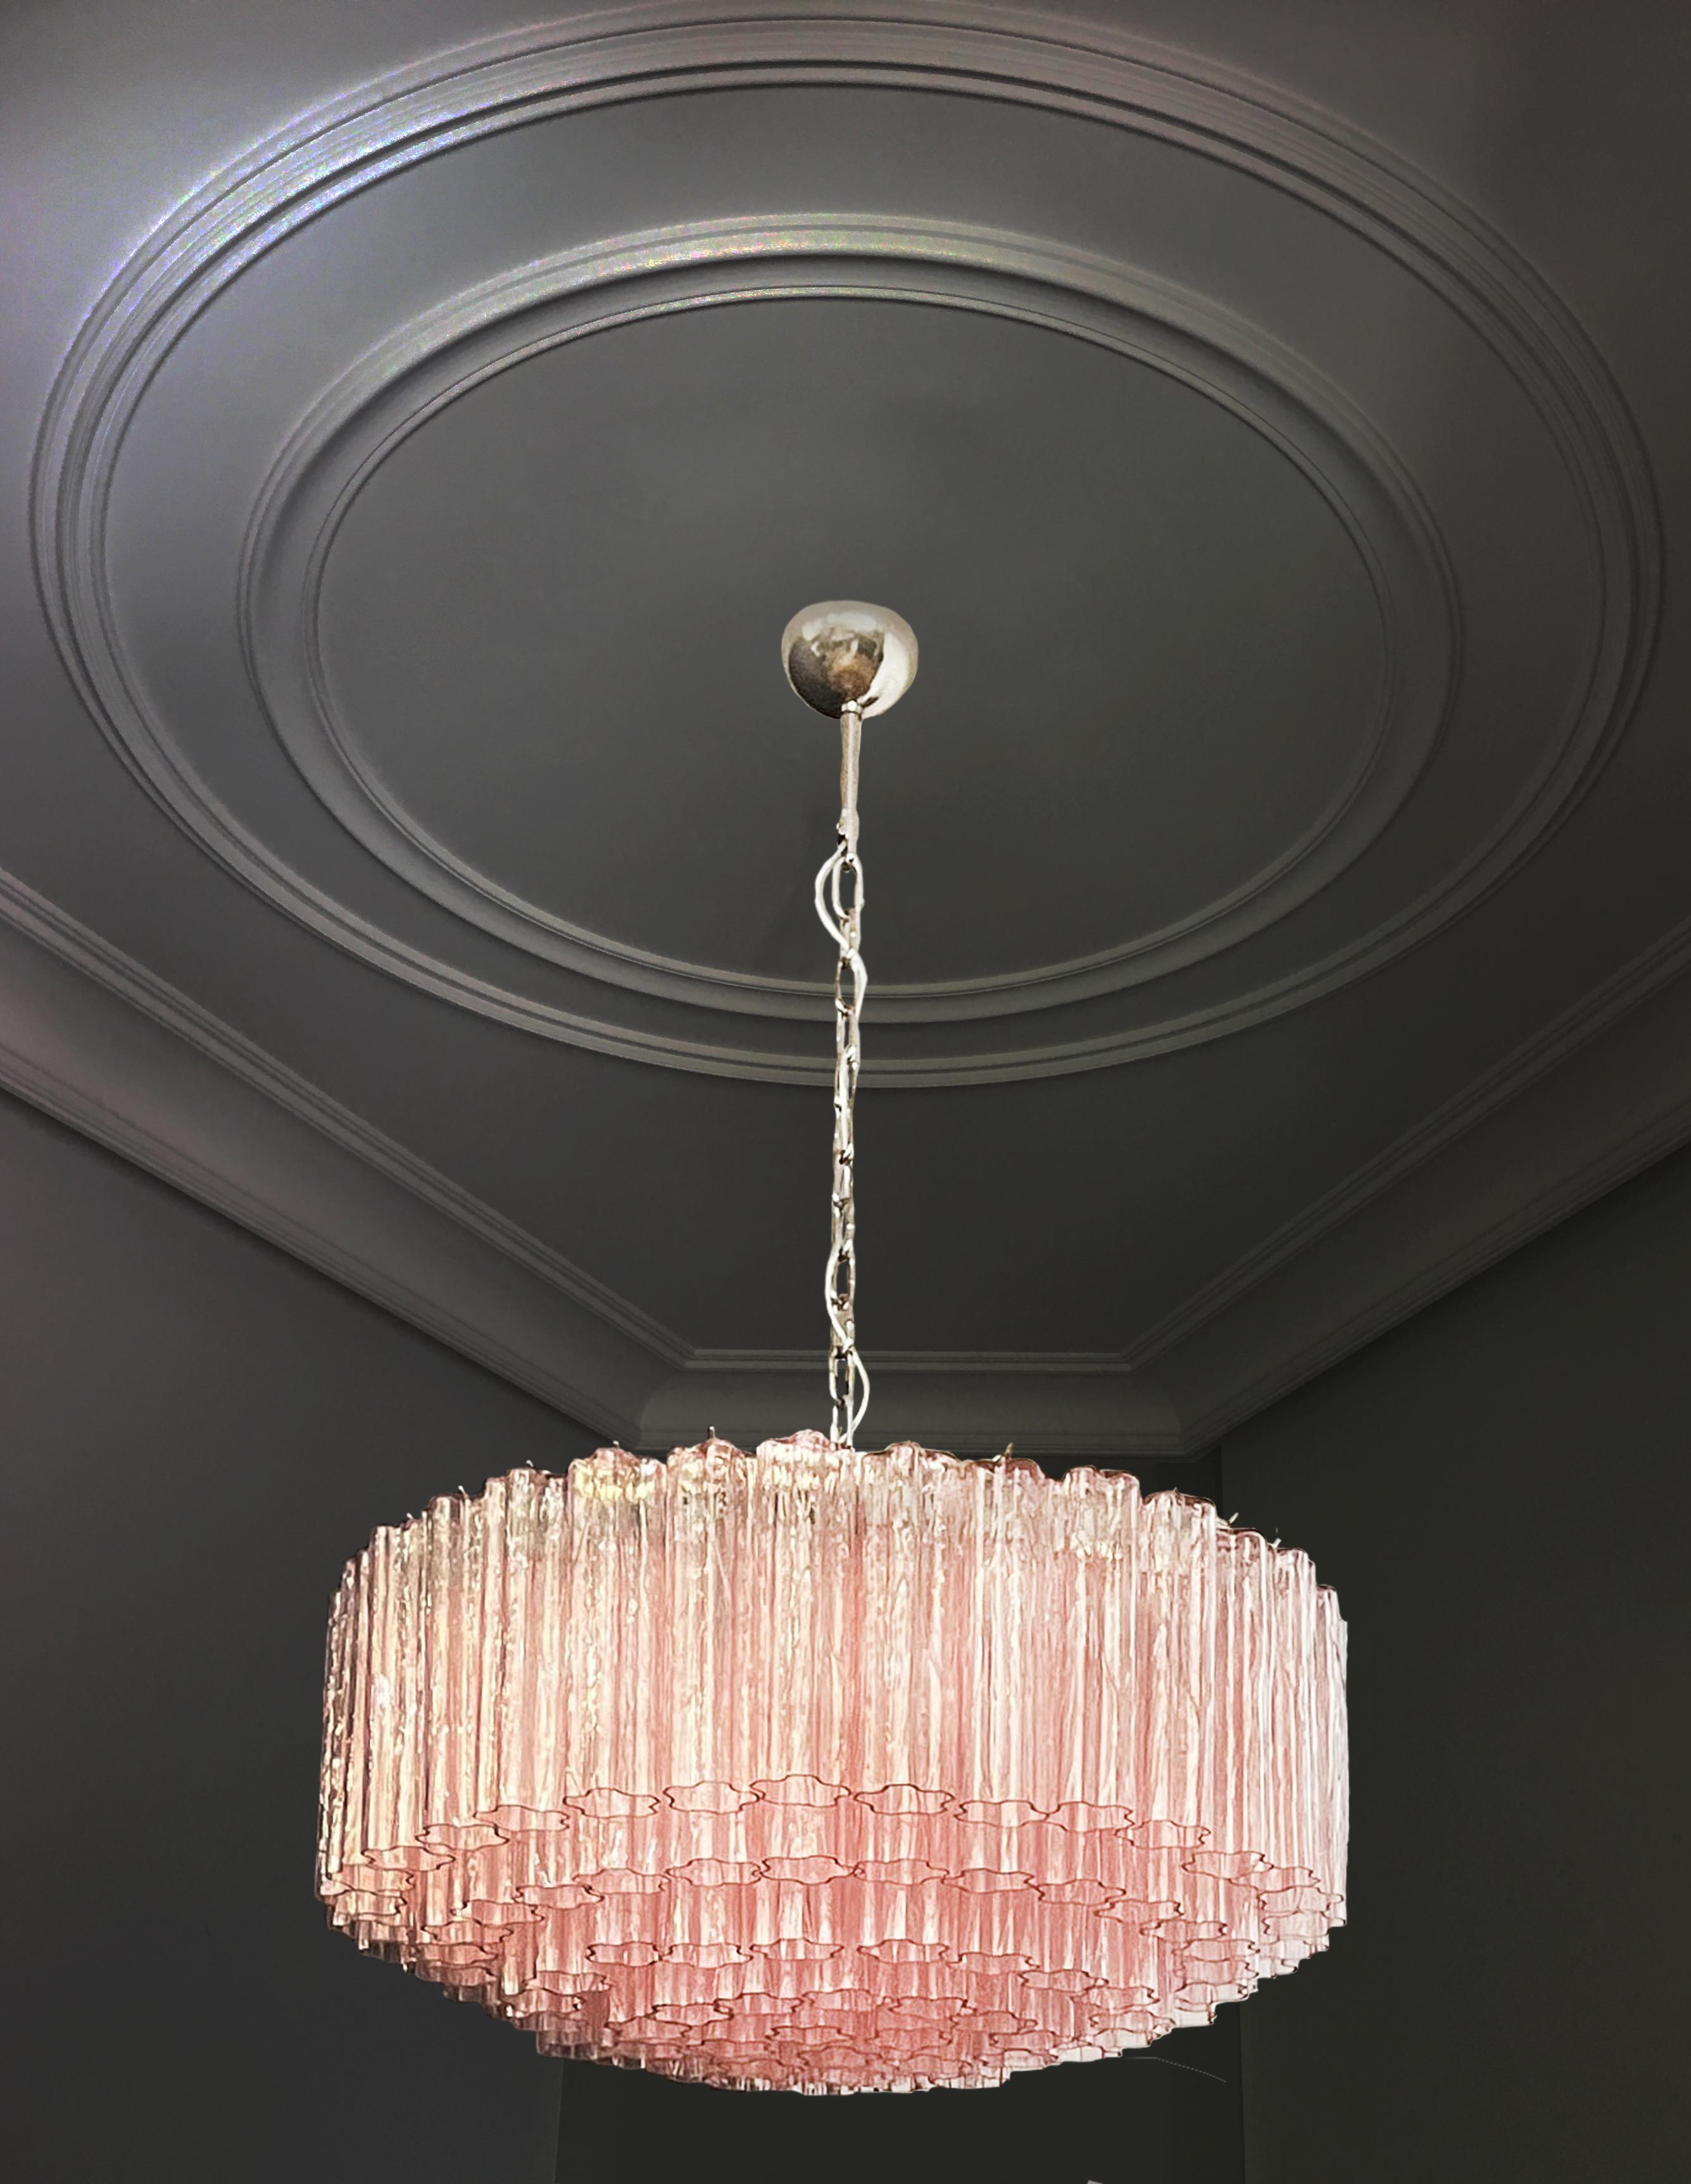 Italian vintage chandelier in Murano glass and nickel plated metal structure. The armor polished nickel supports 101 large pink glass tubes in a star shape. Can be used as a chandelier with chain, or as a ceiling light, the structure will be hung